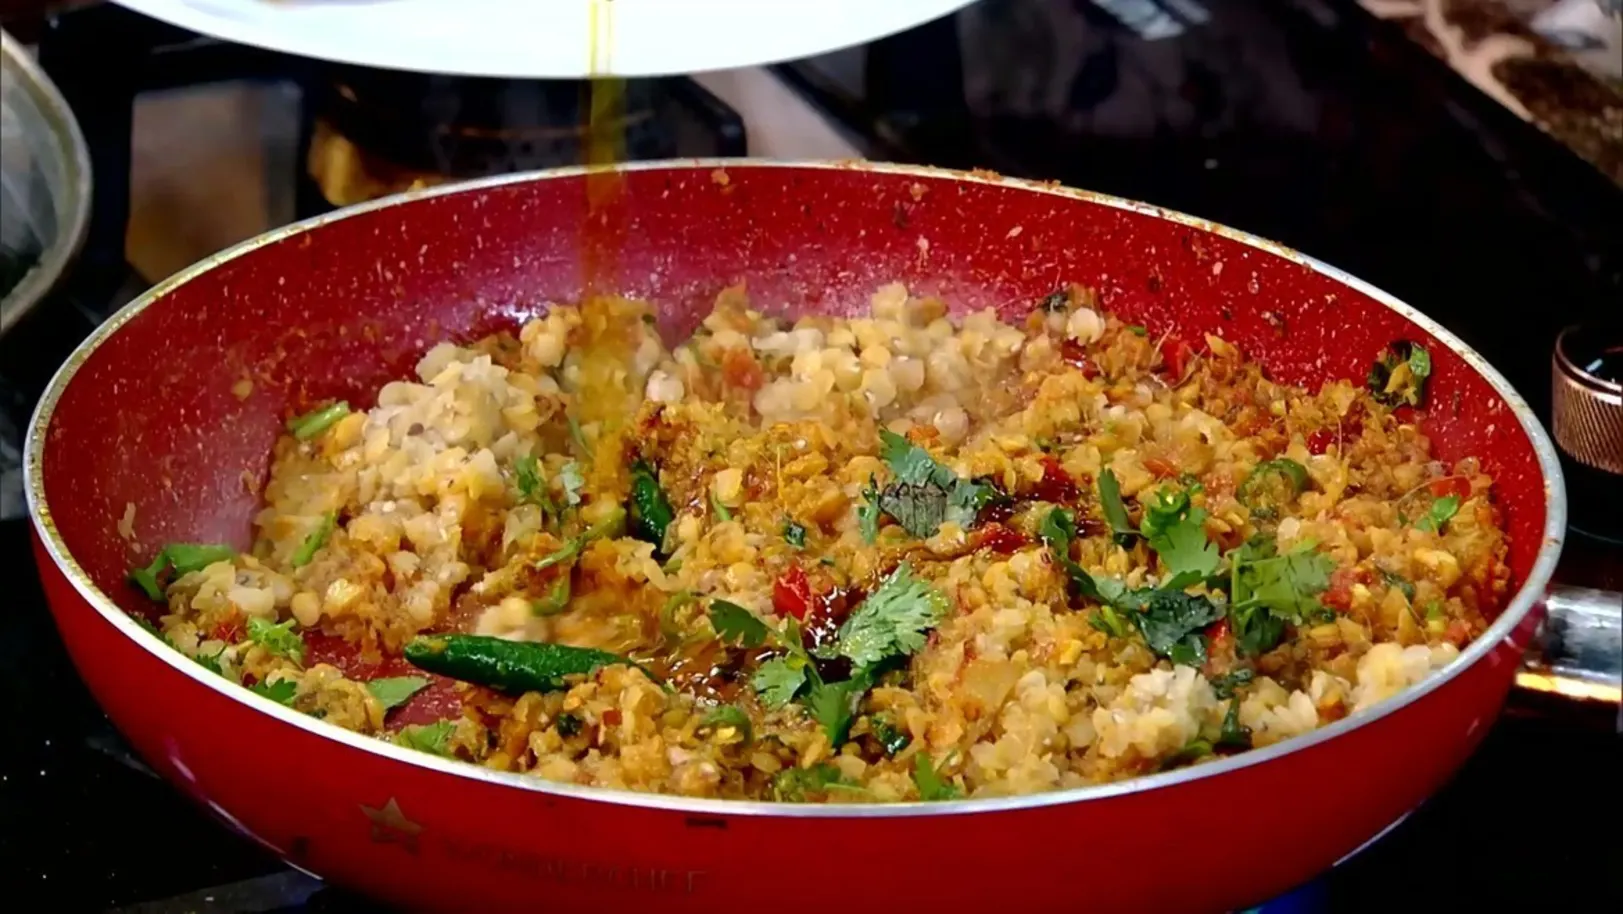 The Benefits of Eating 'Panta Bhaat’ and 'Doi’ Episode 4968